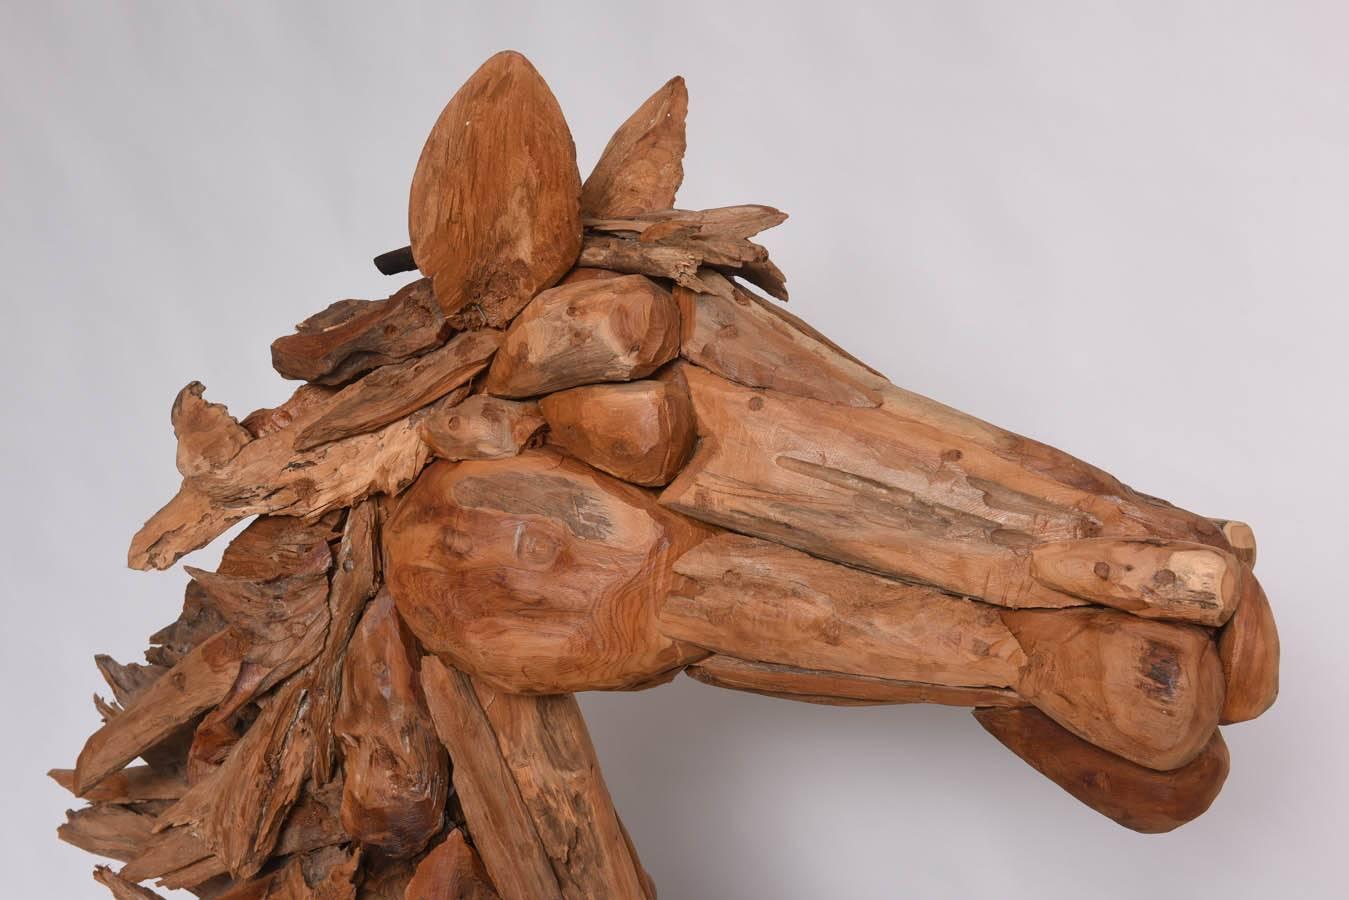 Constructed of pieces of drift wood , this sculpture has very good detail and shows a mastery of technique.